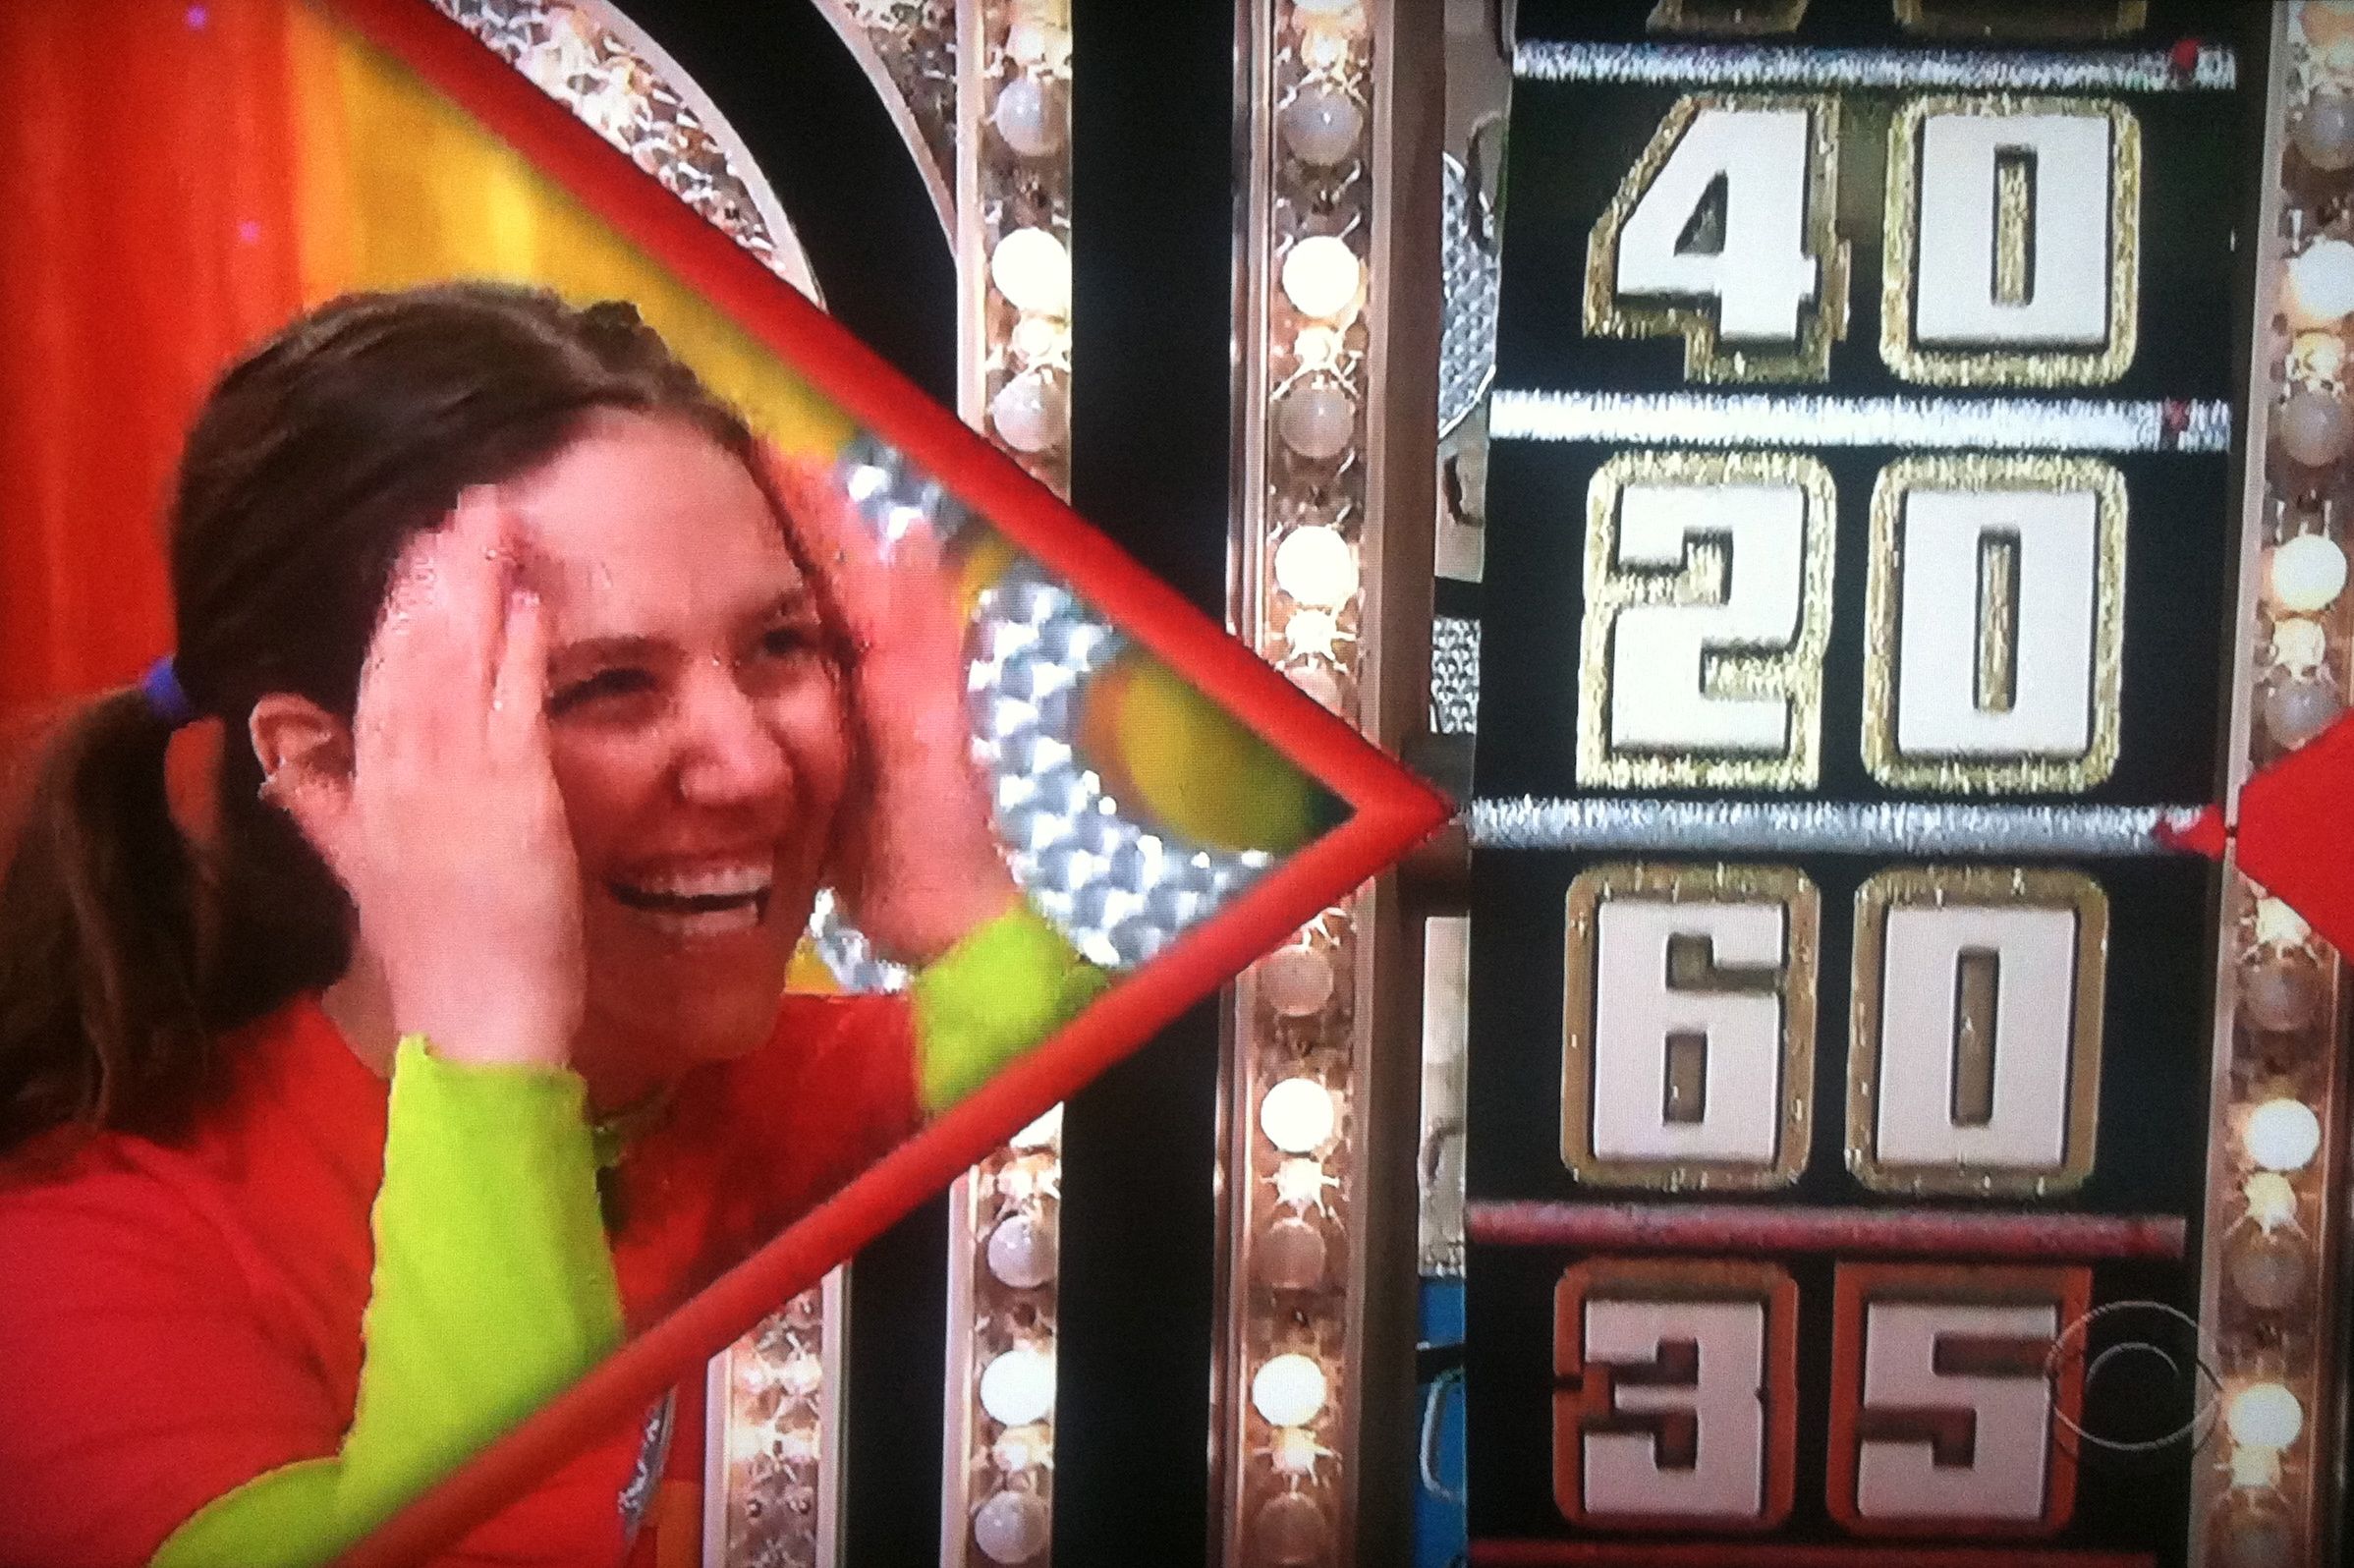 Aurora De Lucia smiling while spinning the big wheel on The Price is Right